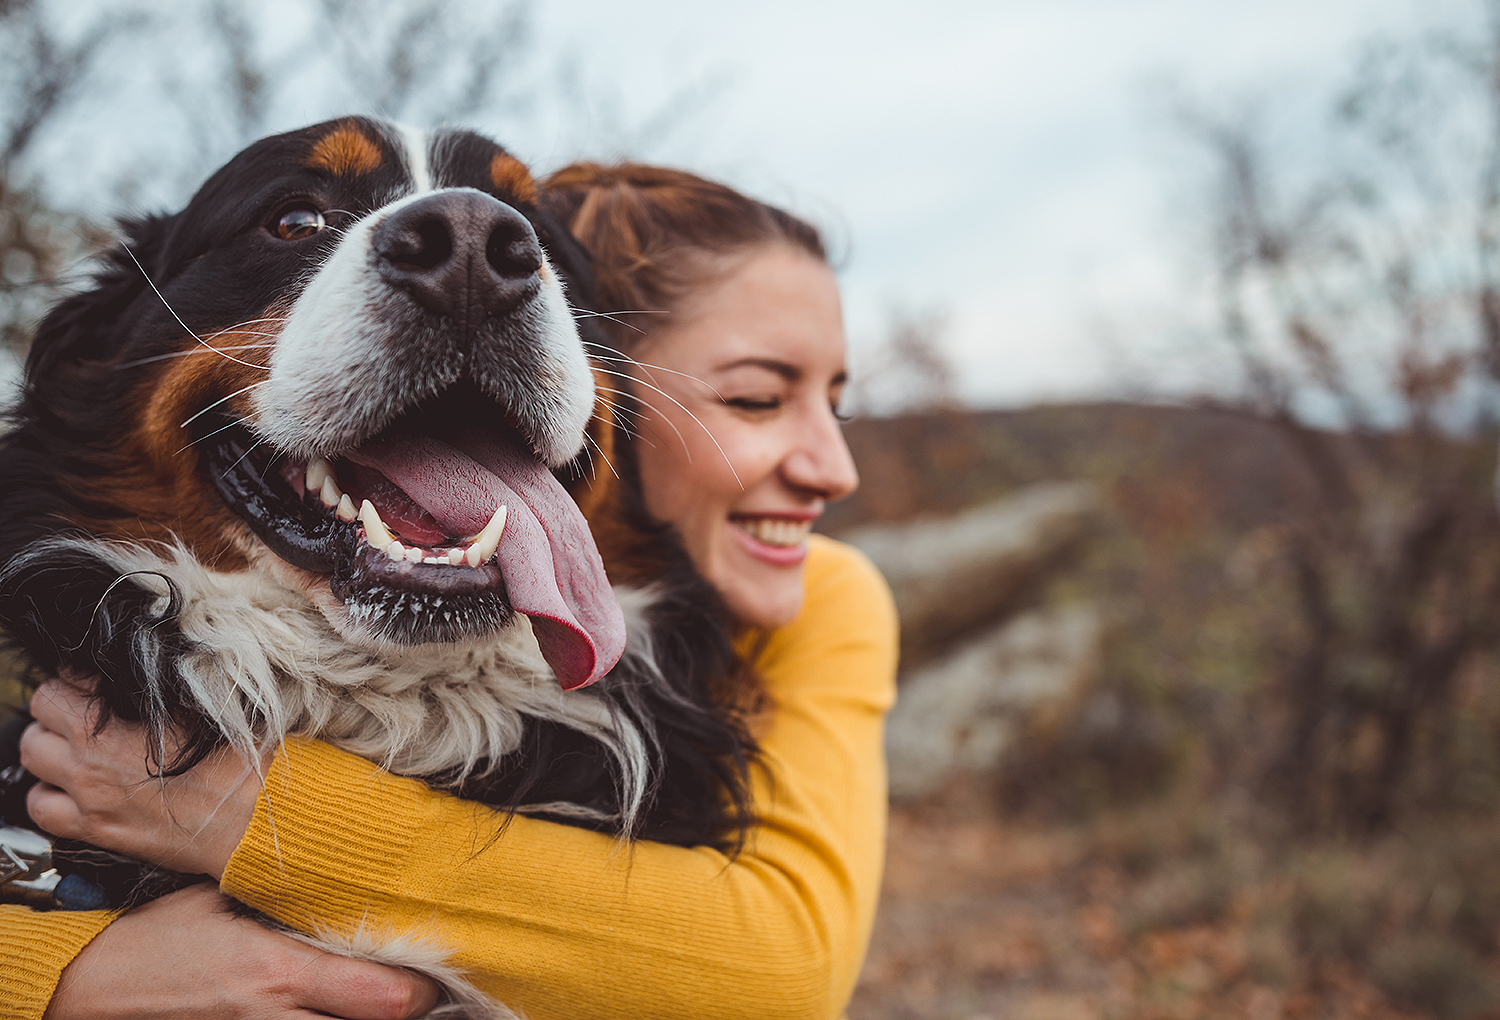 Why Should You Prefer To Buy The Best Gifts For Your Dog Lover Friends?